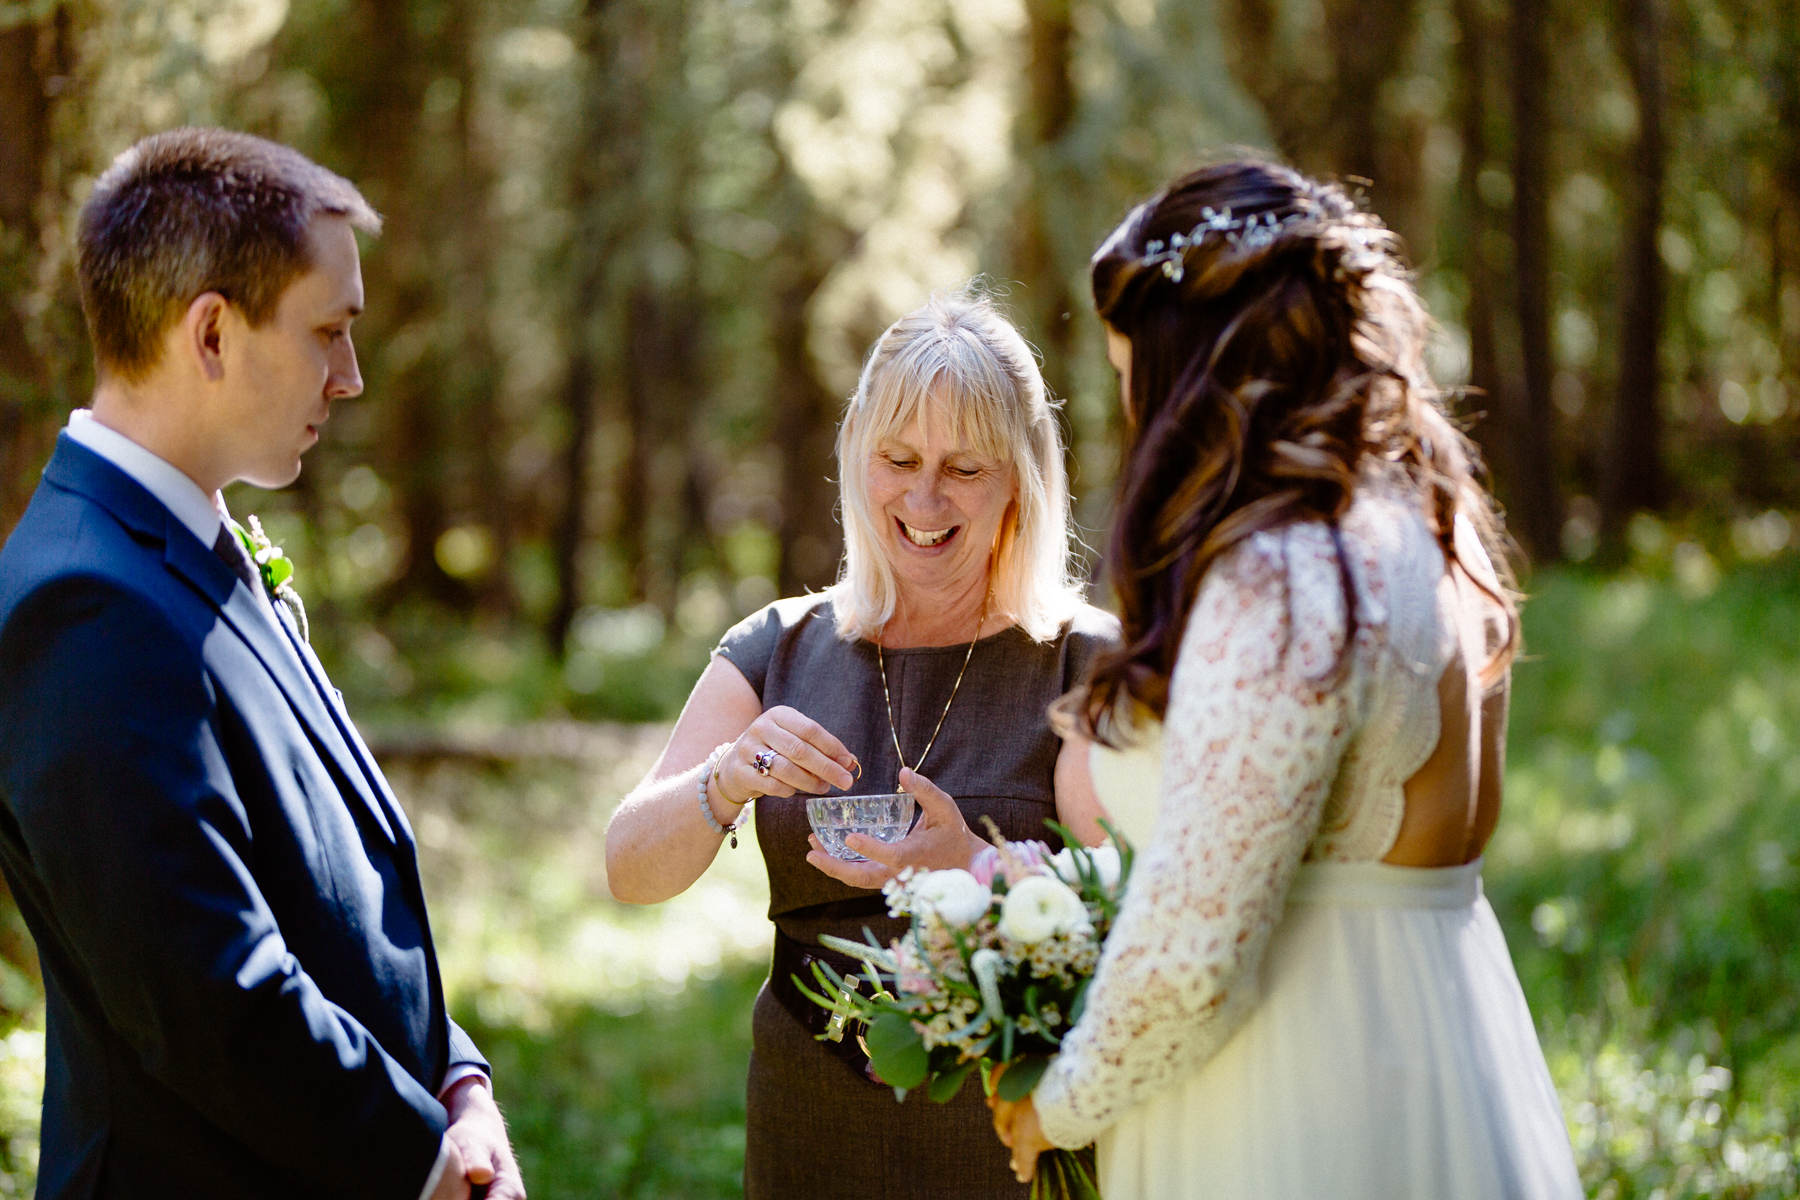 Vow Renewal Photography in Banff - Image 8